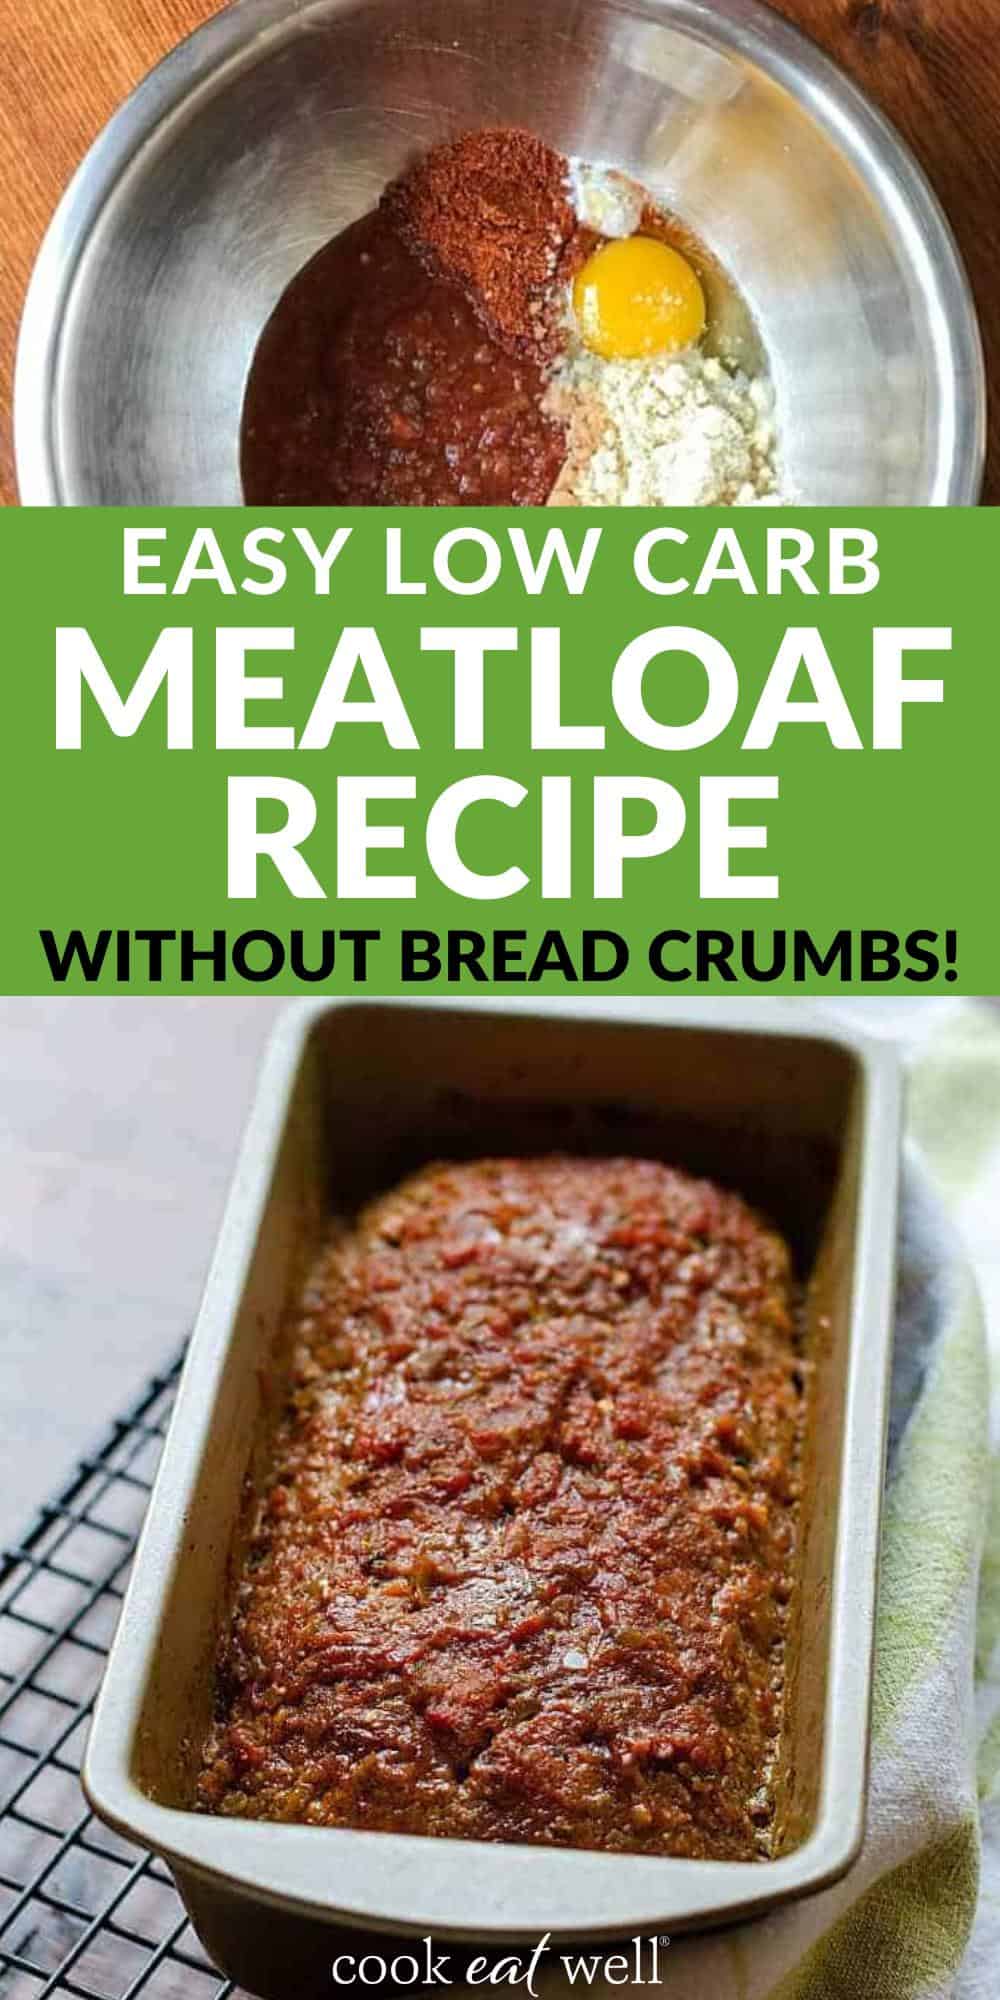 Easy Keto Meatloaf Recipe (Low Carb, Paleo, Whole30) - Cook Eat Well